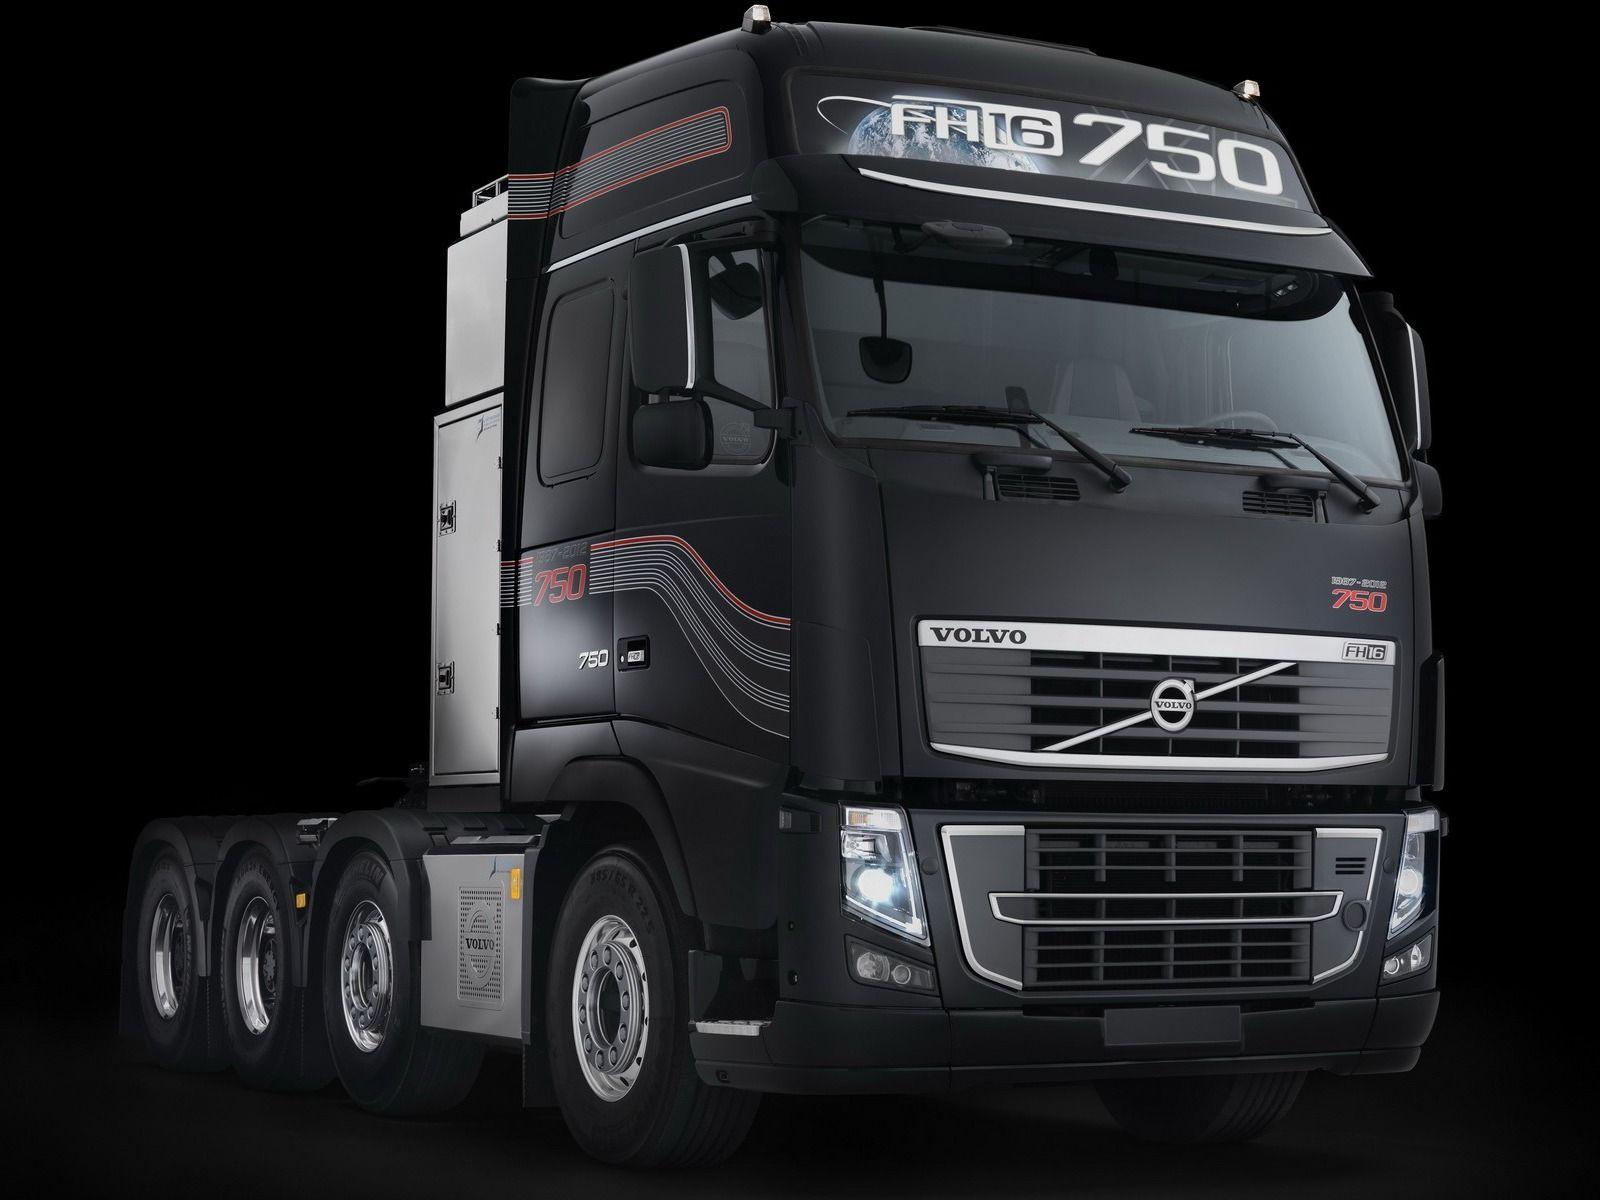 2011 Volvo FH16 750 8x4 tractor semi rig g wallpapers